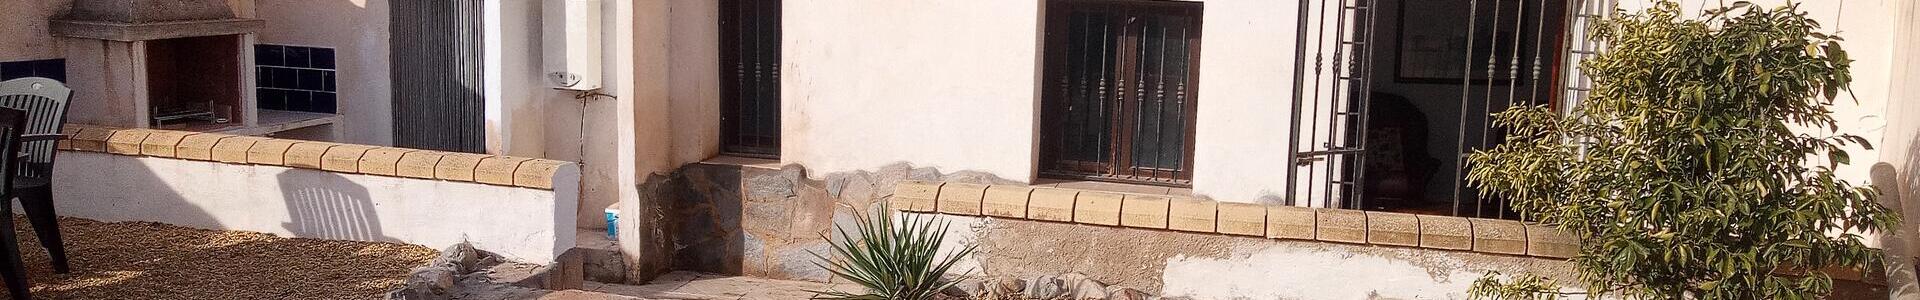 130-1394: 4 Bedroom Cortijo: Traditional Cottage for Sale